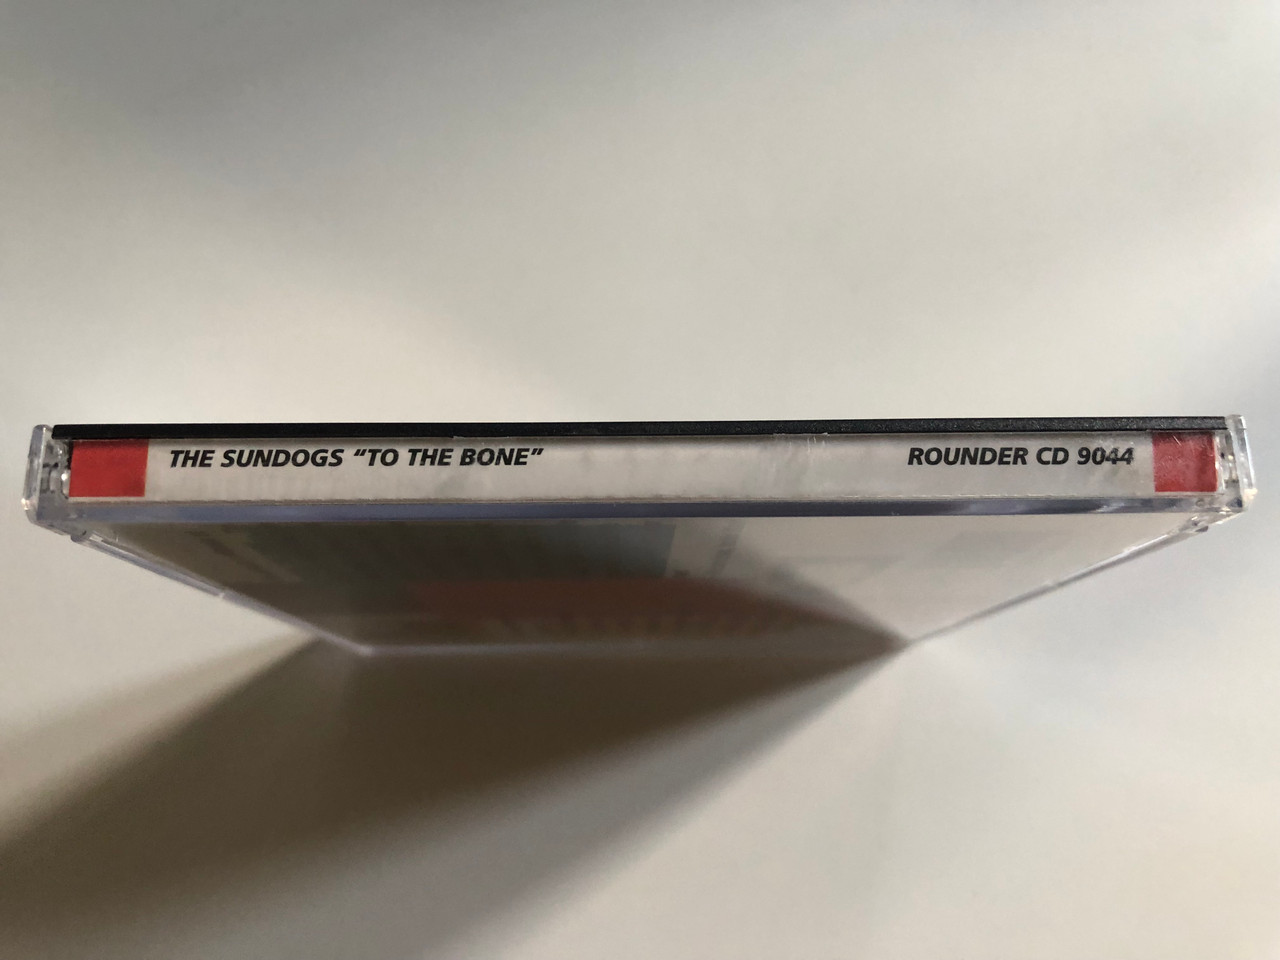 https://cdn10.bigcommerce.com/s-62bdpkt7pb/products/0/images/313861/The_Sundogs_To_The_Bone_Rounder_Records_Audio_CD_1994_CD_9044_3__26457.1701091566.1280.1280.JPG?c=2